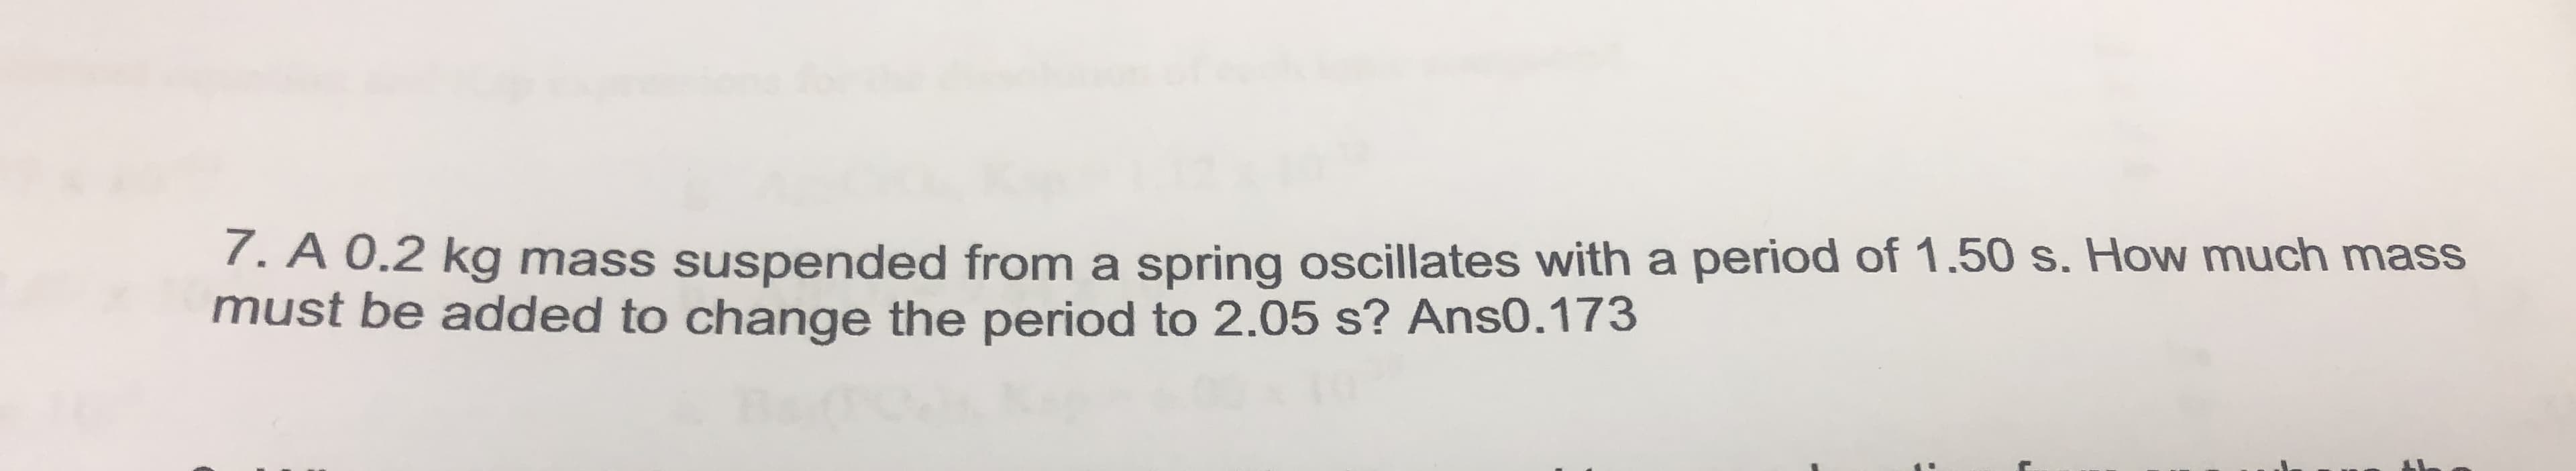 7. A 0.2 kg mass suspended from a spring oscillates with a period of 1.50 s. How much mass
must be added to change the period to 2.05 s? Ans0.173
